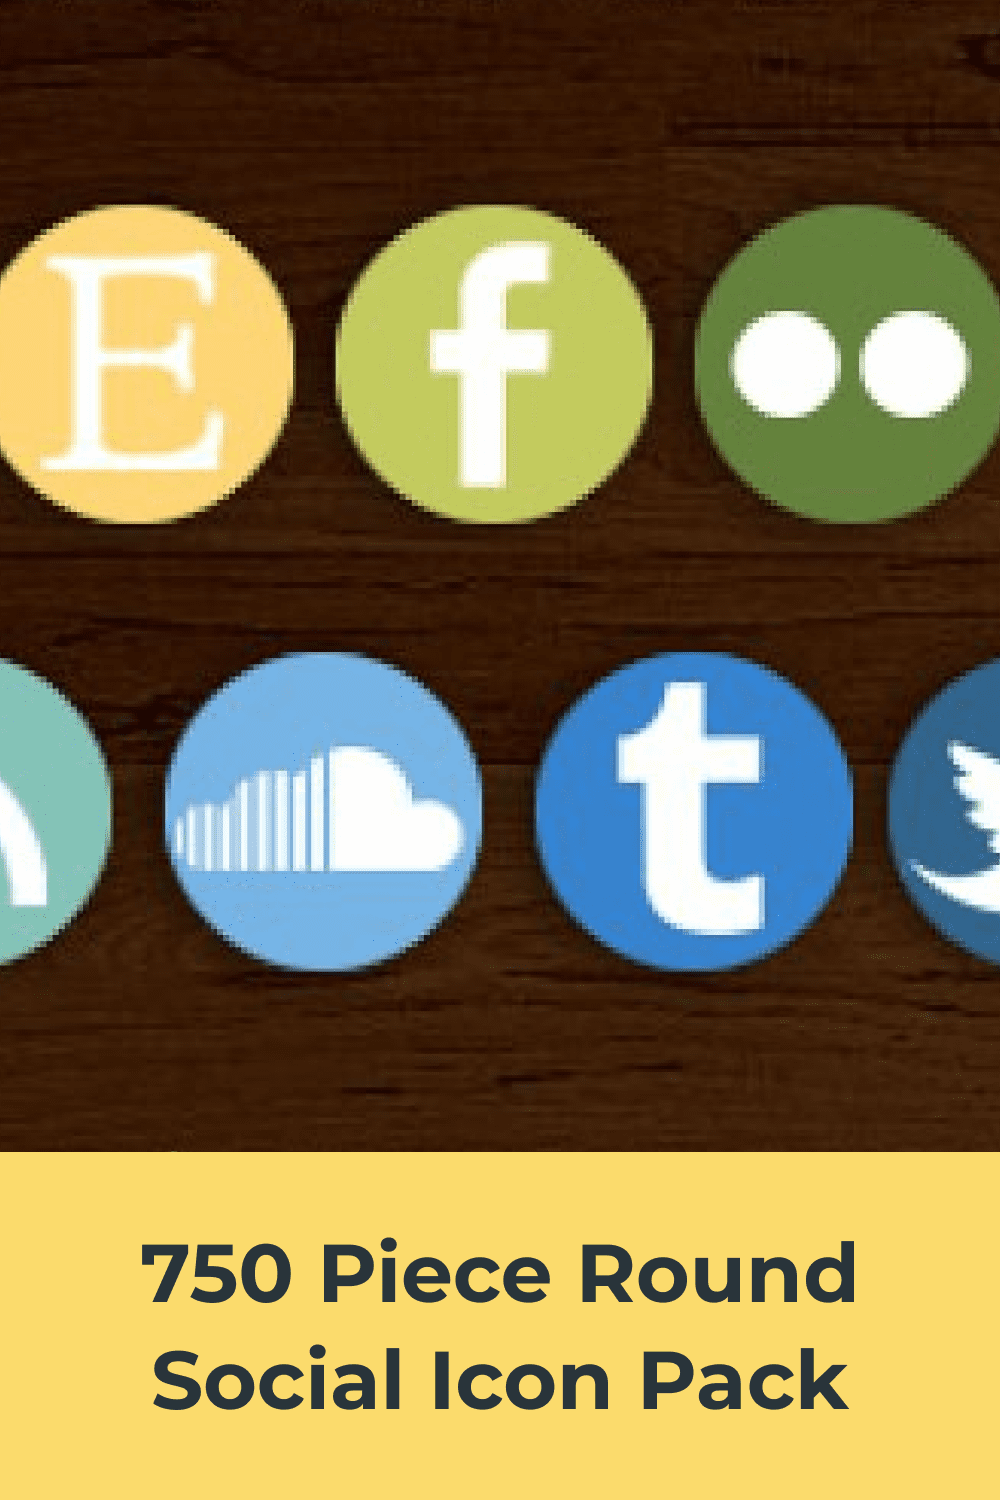 Cool modern round icons for social media.